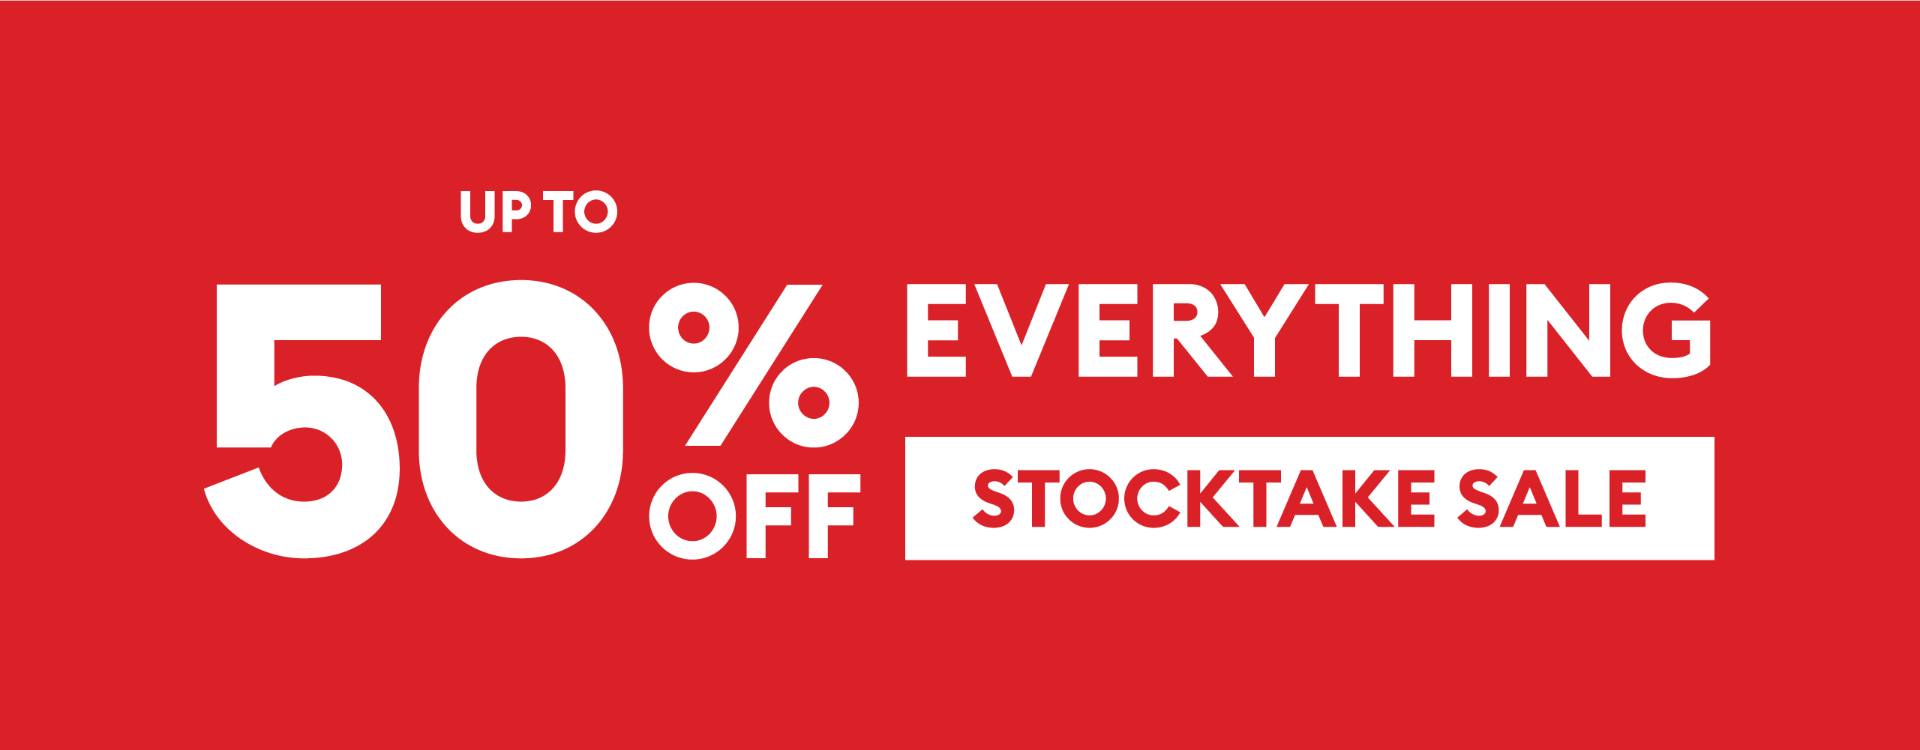 Up to 50 off Stocktake Campaign - Package Deal currently inactive